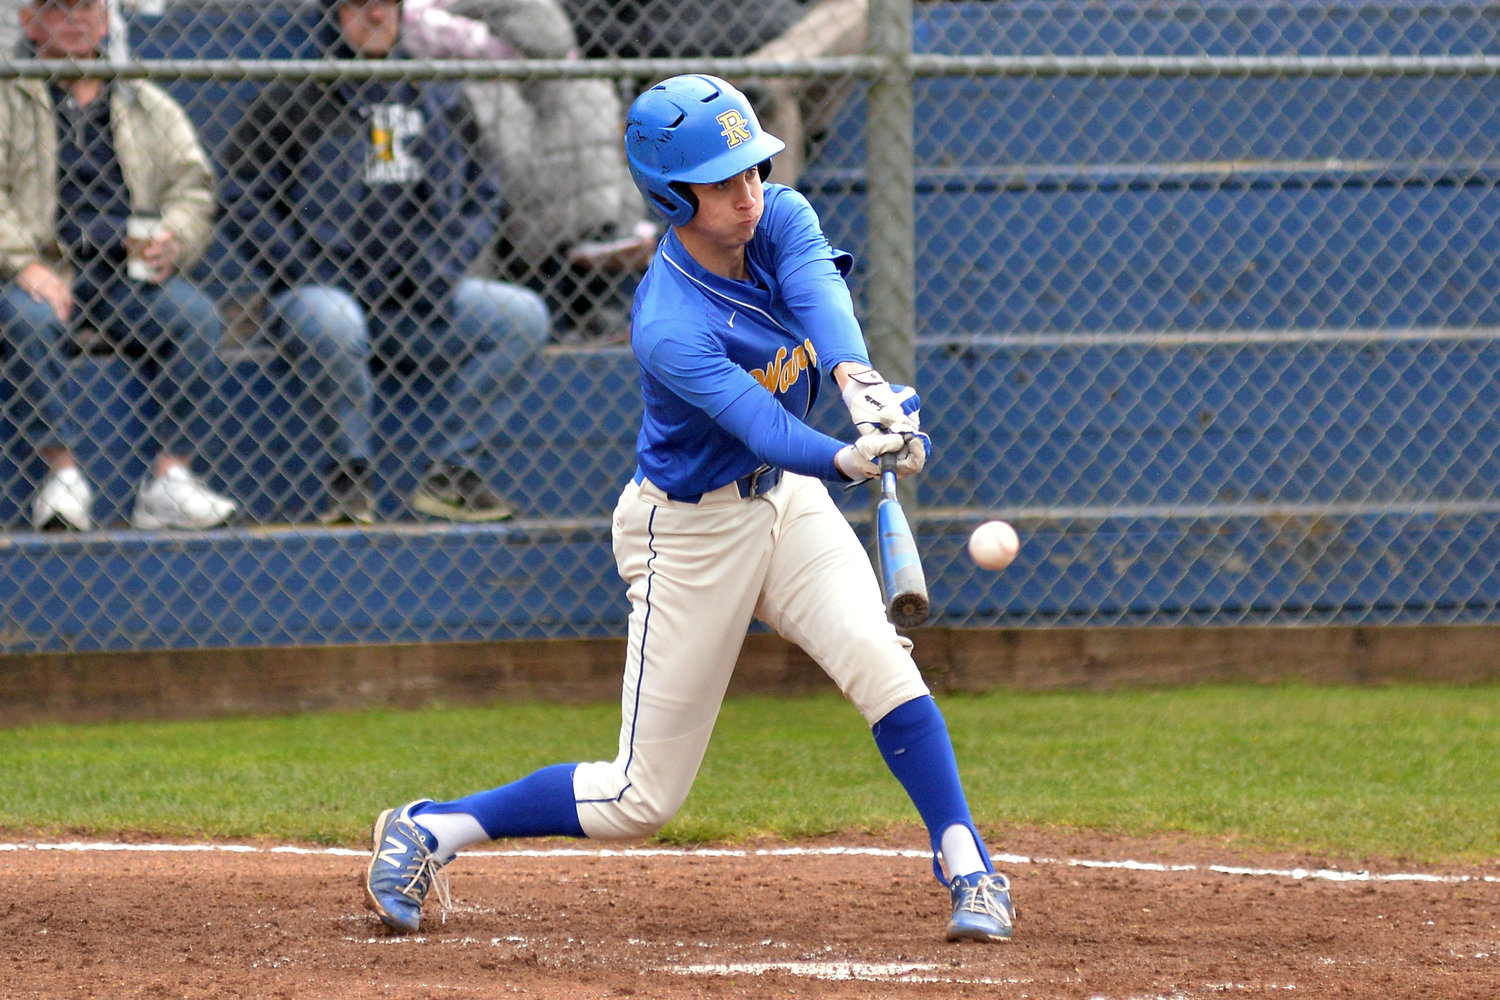 Rochester’s Tony Groninger lines up a base hit in a road game against Aberdeen on April 14.